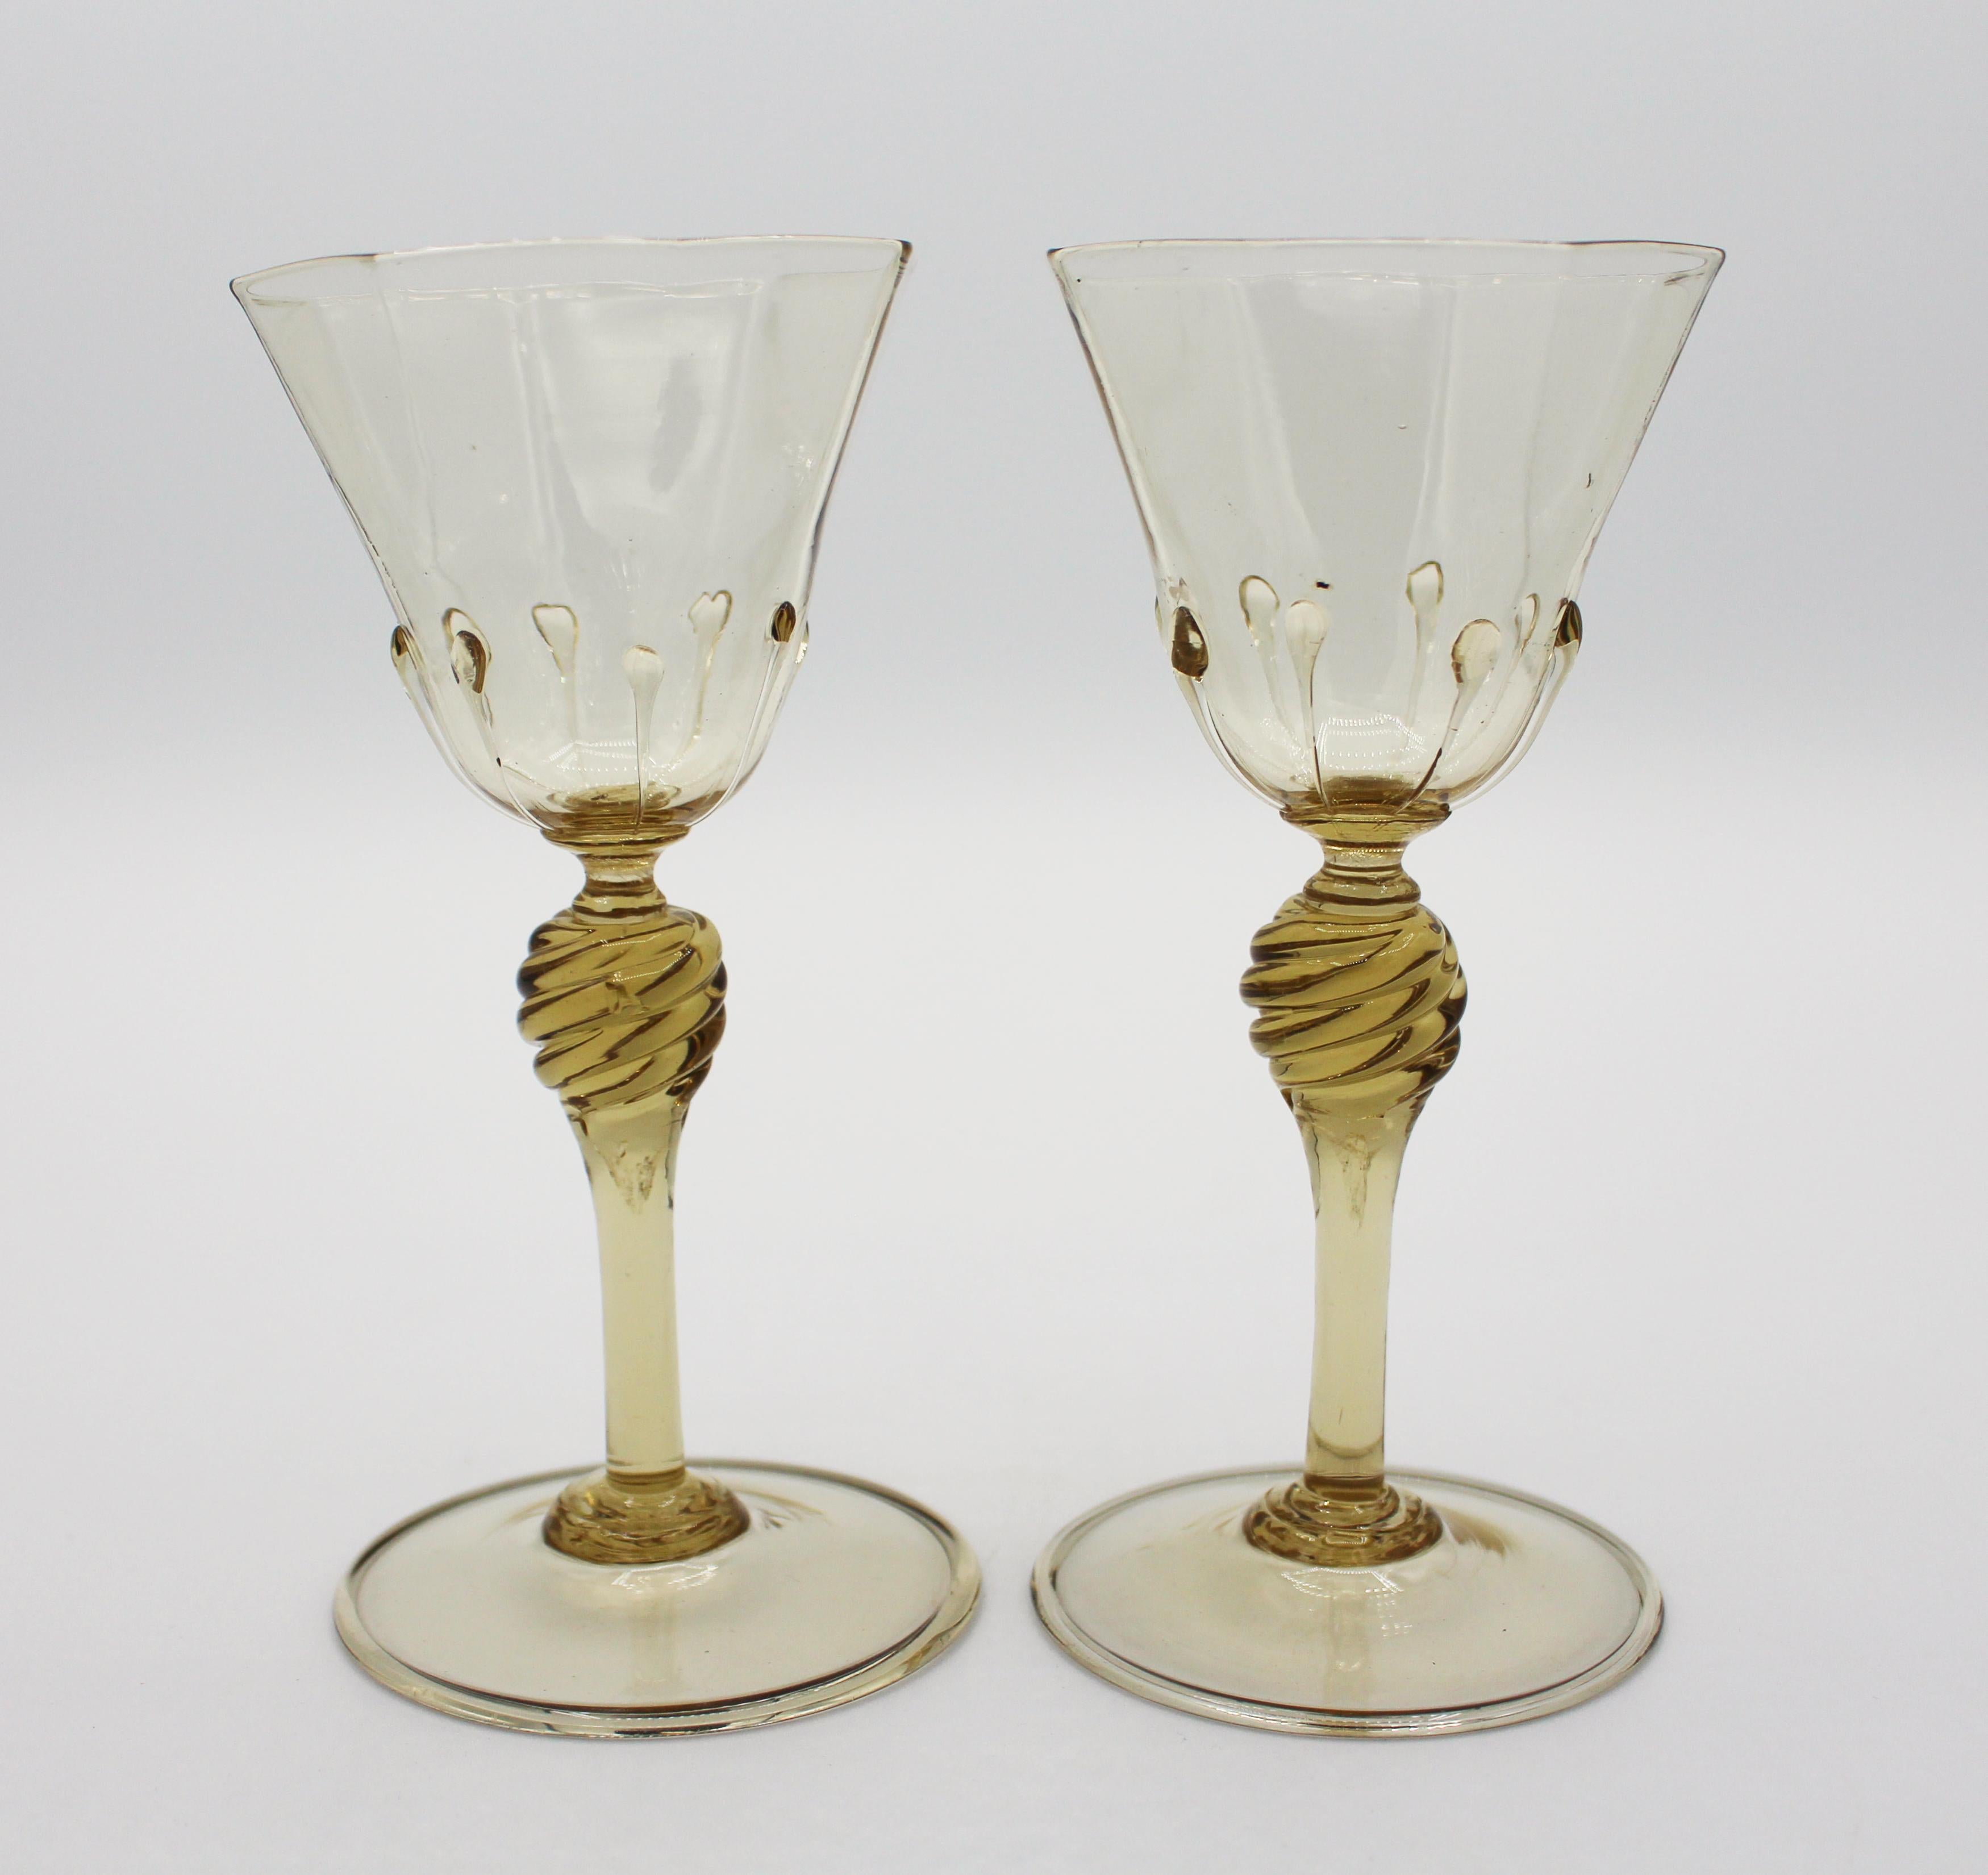 A pair of toasting glasses, c.1925, octagonal citrine to light topaz color glass with swirl knop stems and droplets on each ridge. Salviati, Murano Venetian glass. Approx 6 1/8